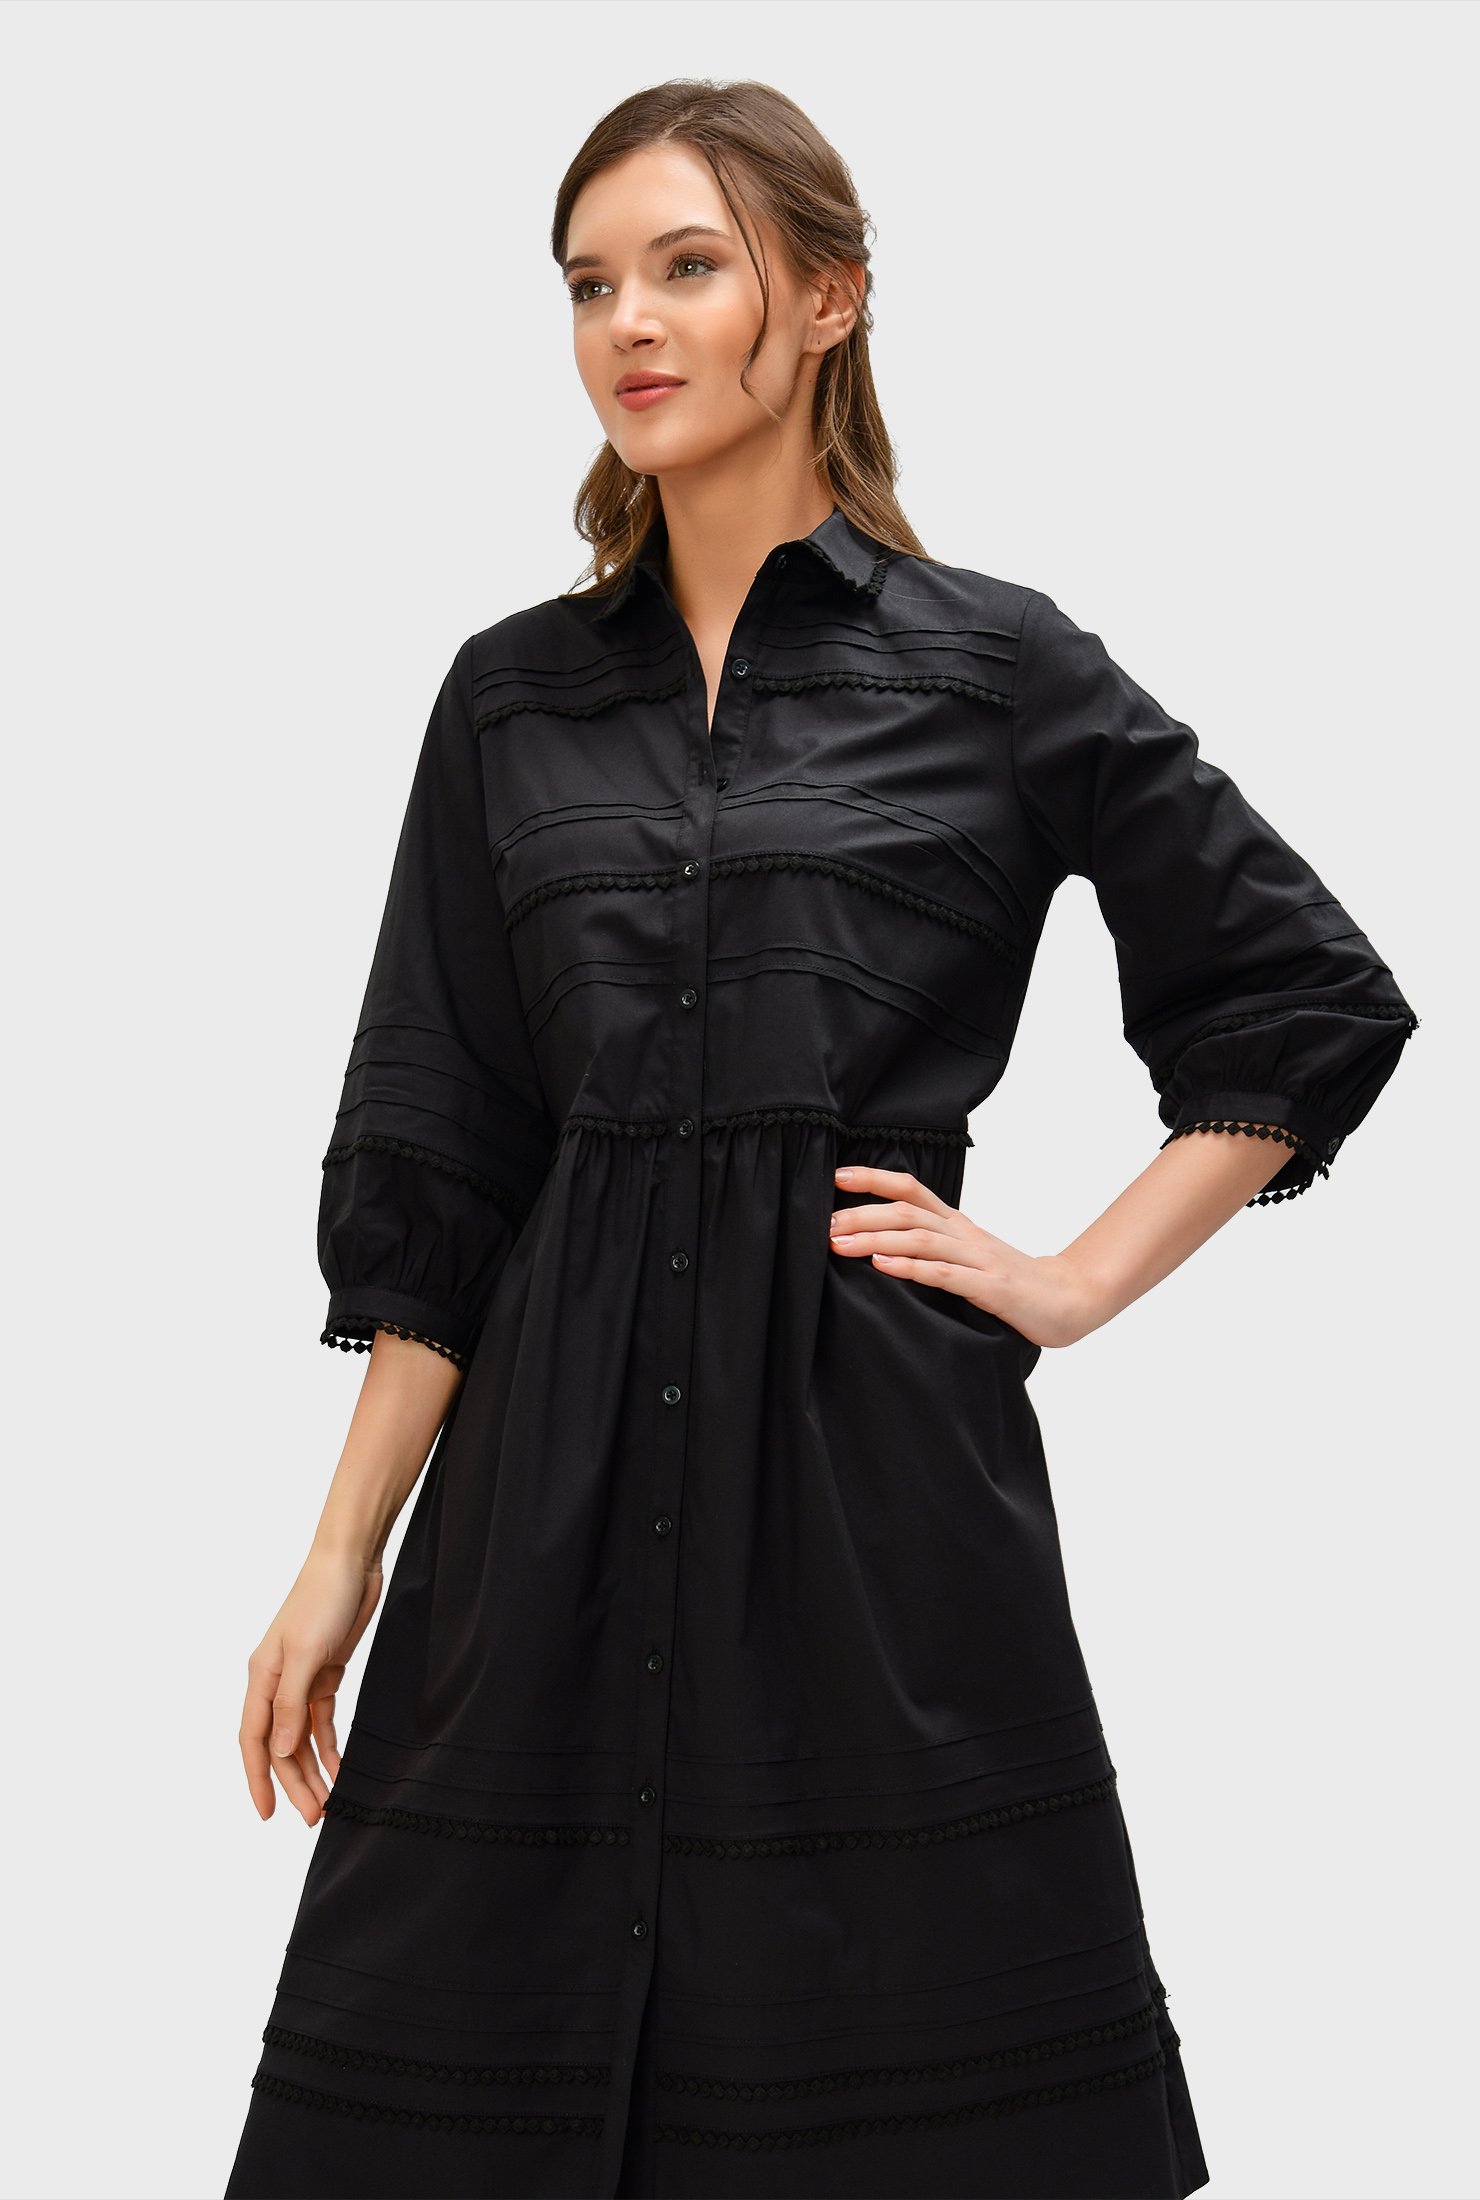 Cotton poplin with crochet lace trim is right at home in our ruched-tier shirtdress ready to take on the week or a weekend adventure.